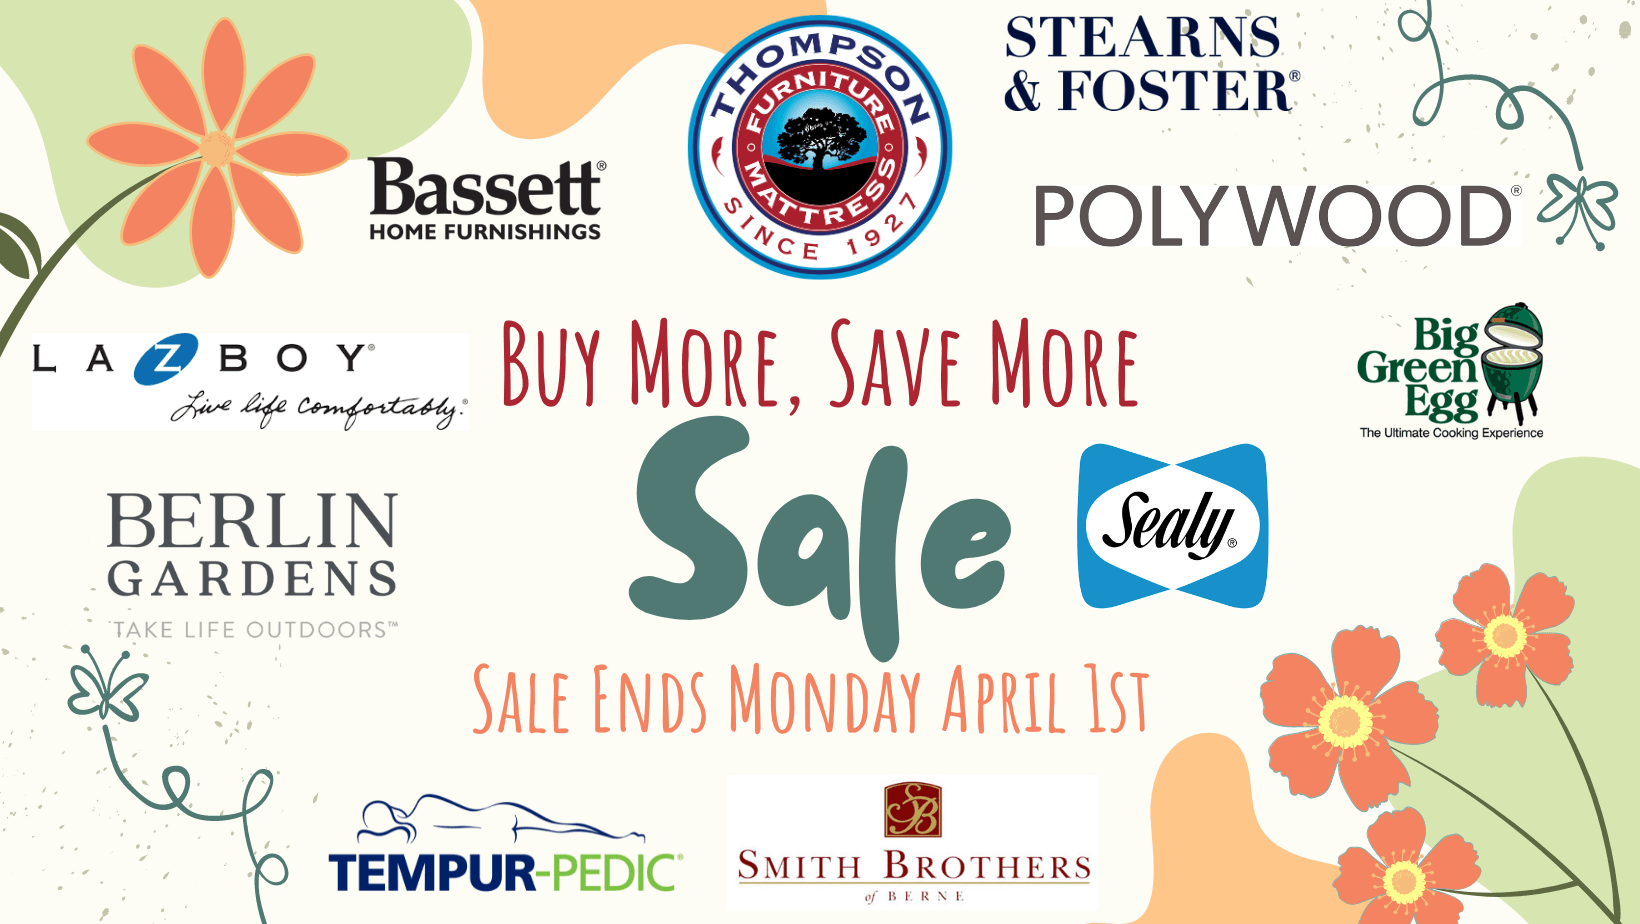 Buy More, Save More Sale - Ends April 1